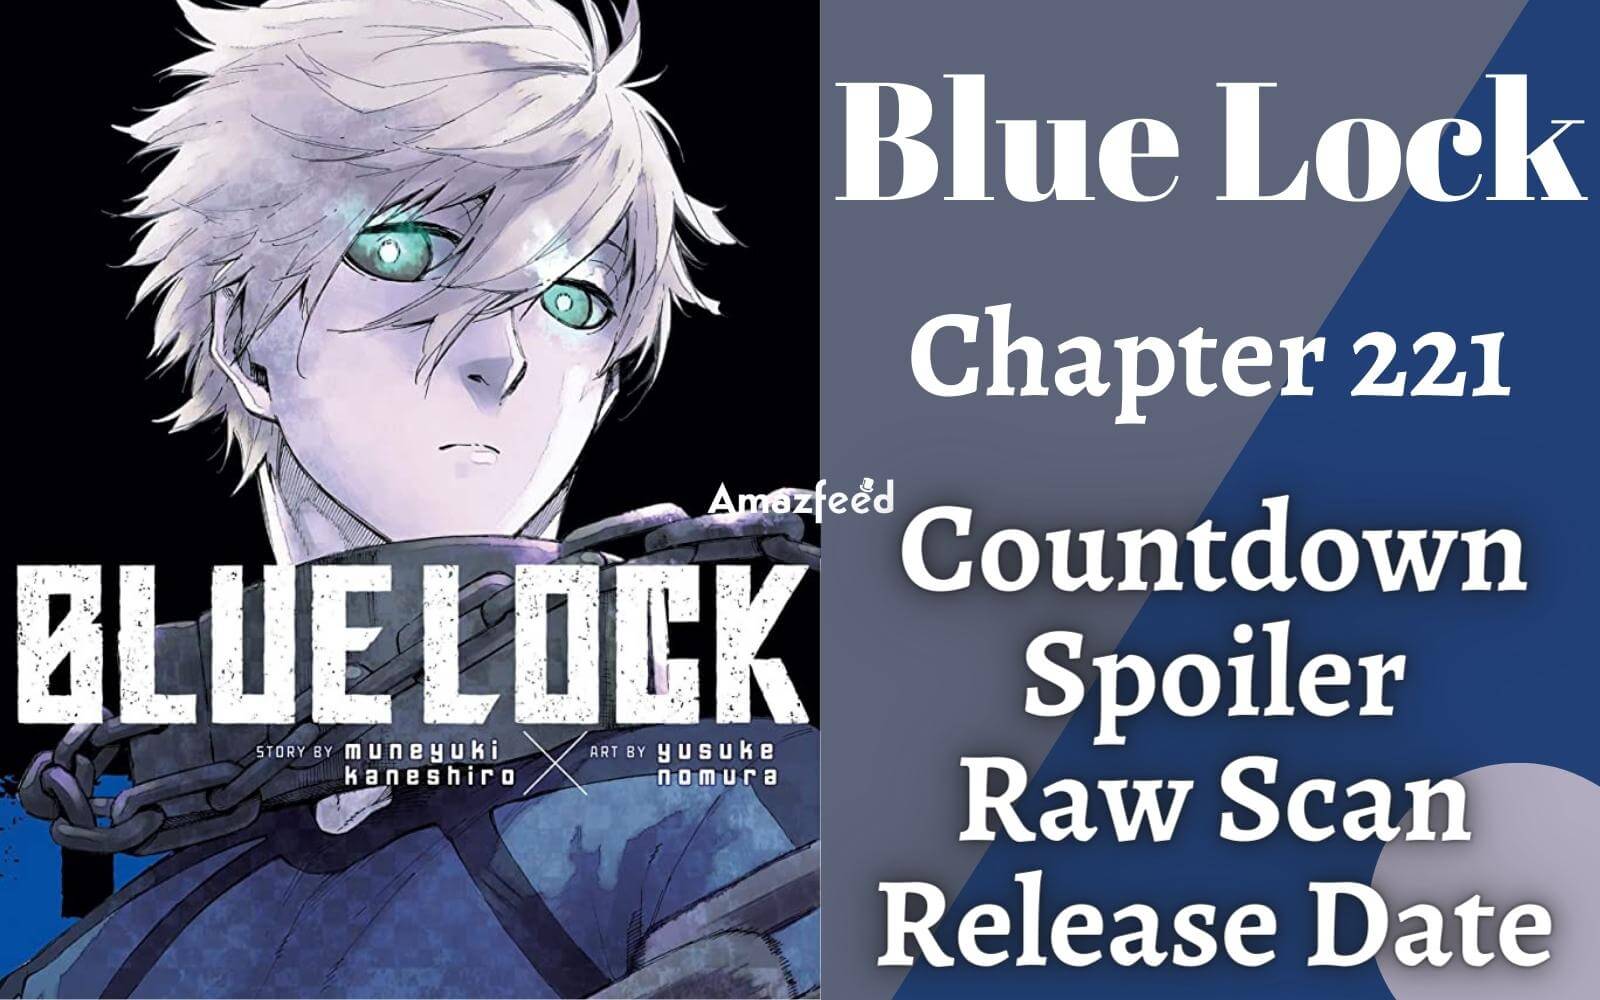 Blue Lock season 2 release date speculation, cast, plot, and news